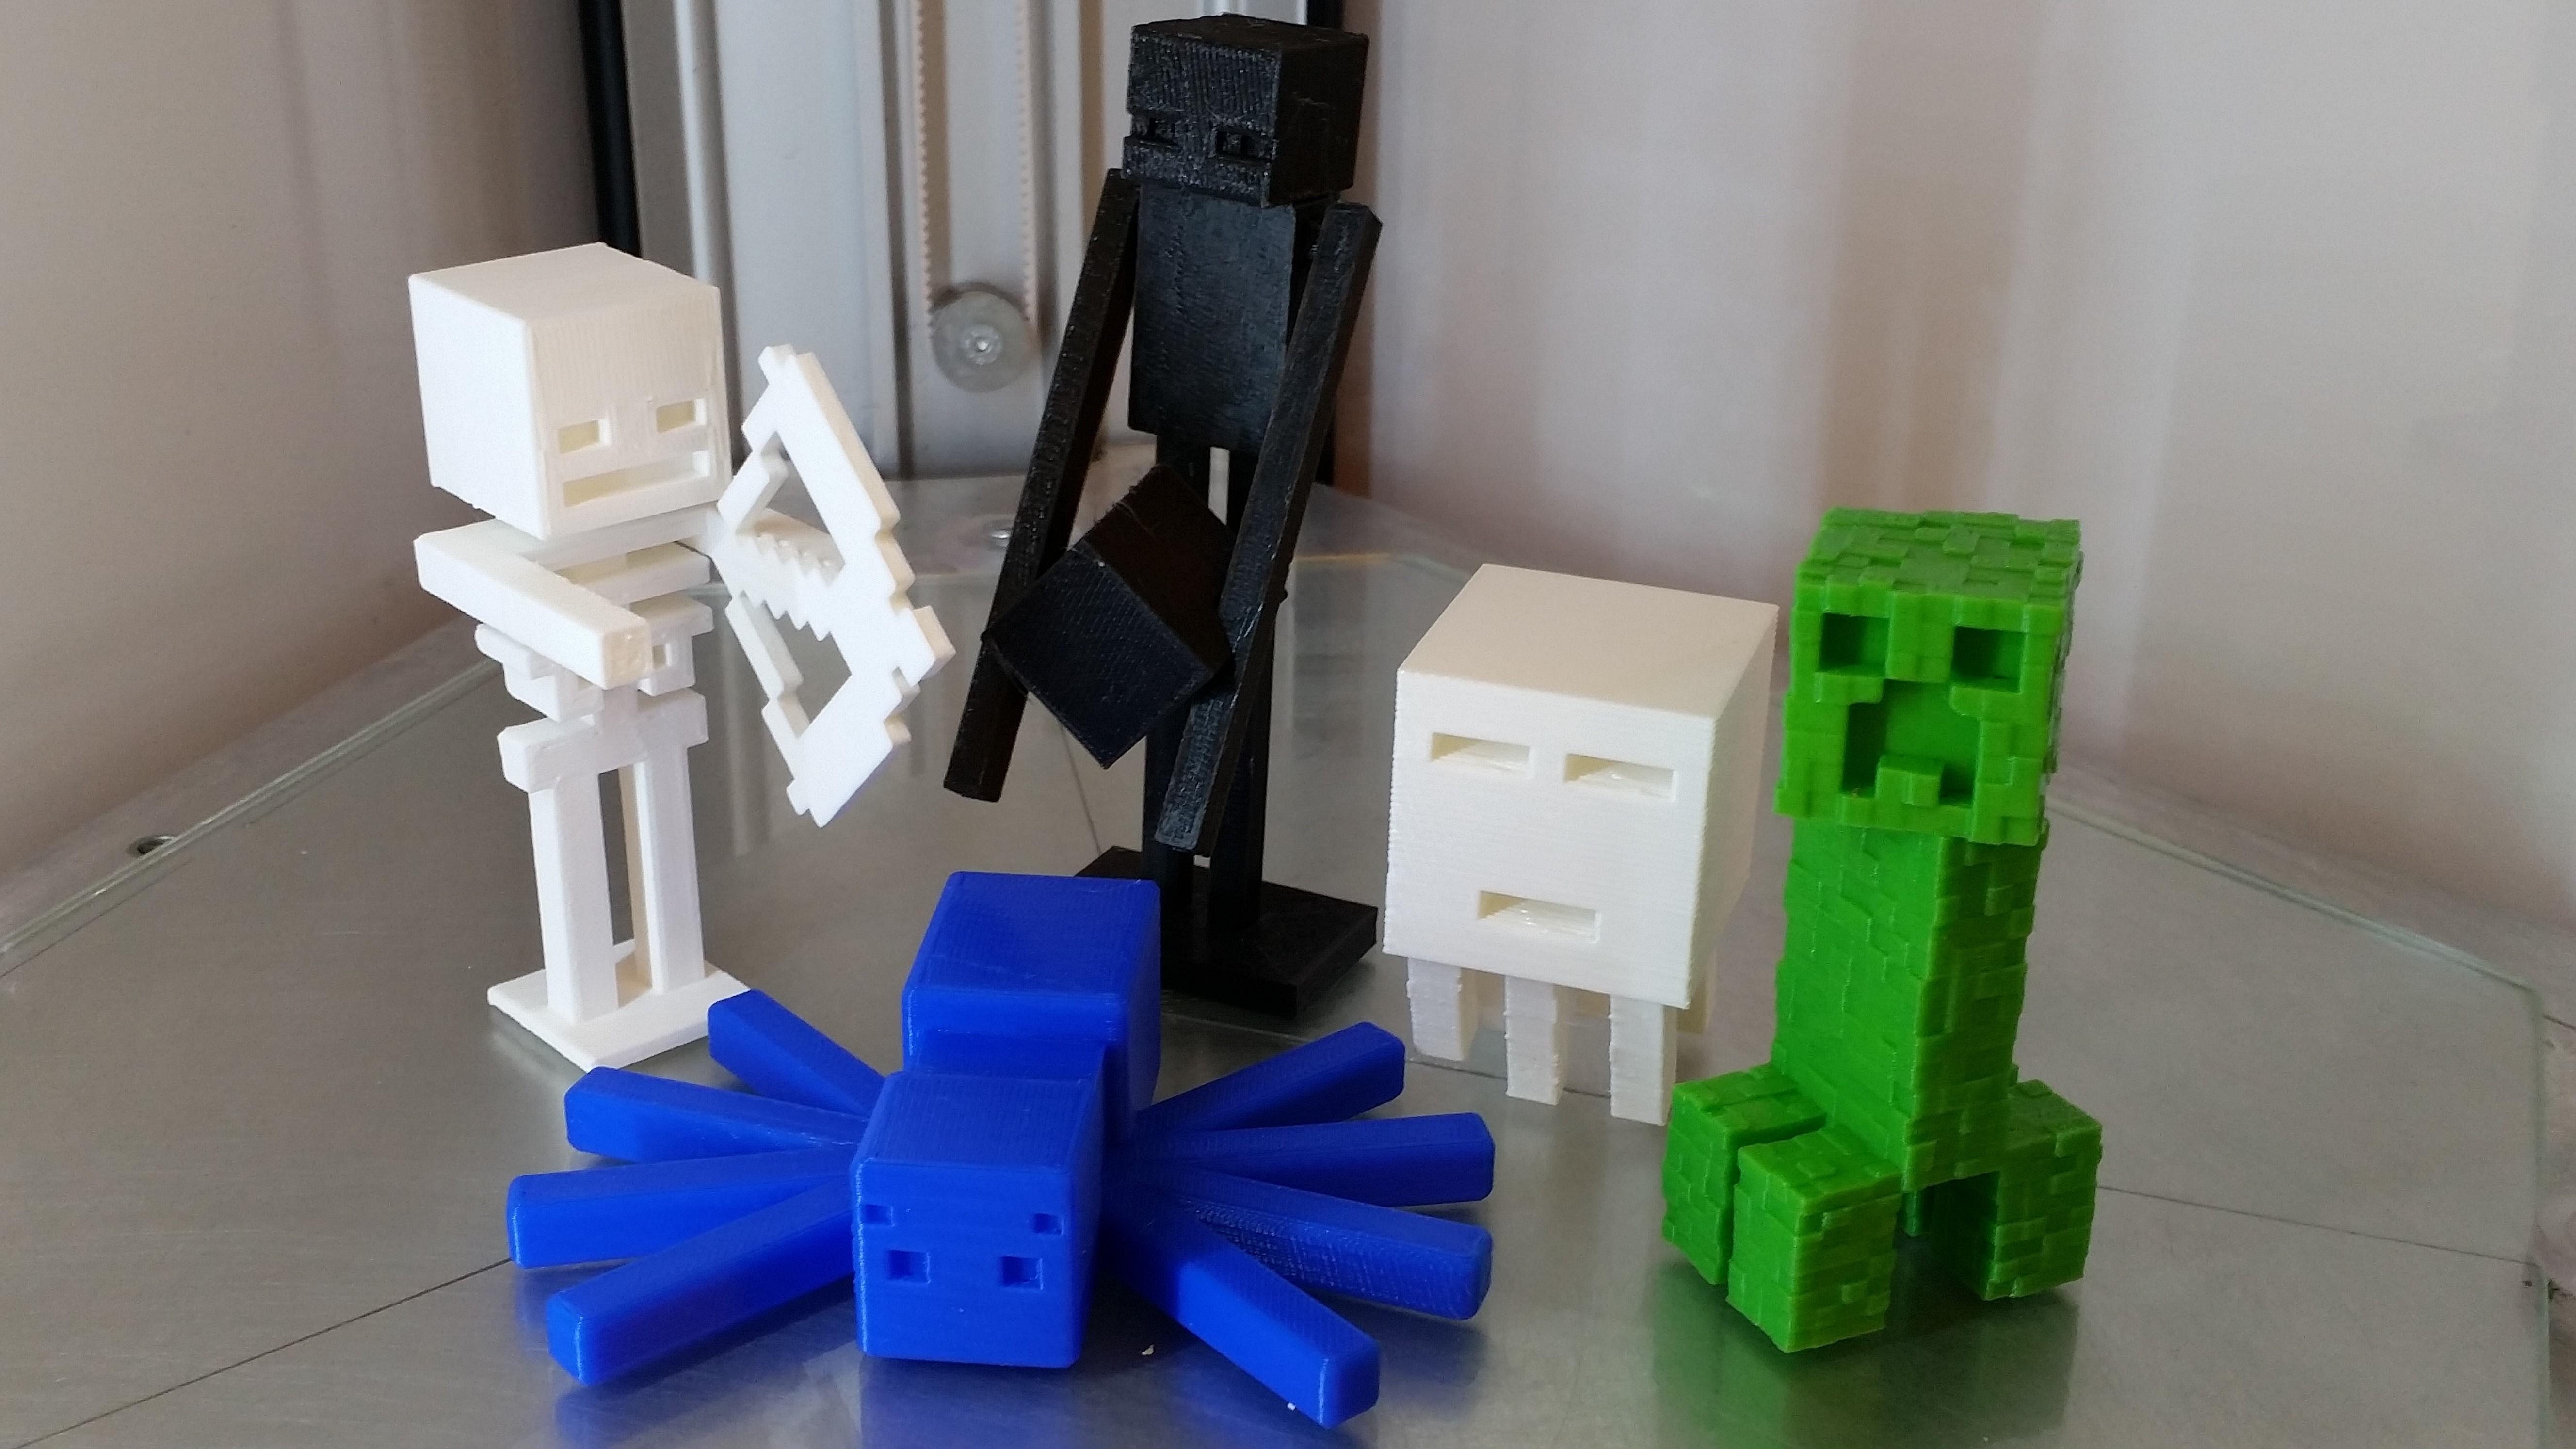 3d Printed Minecraft Mobs Creeper Skeleton And Others